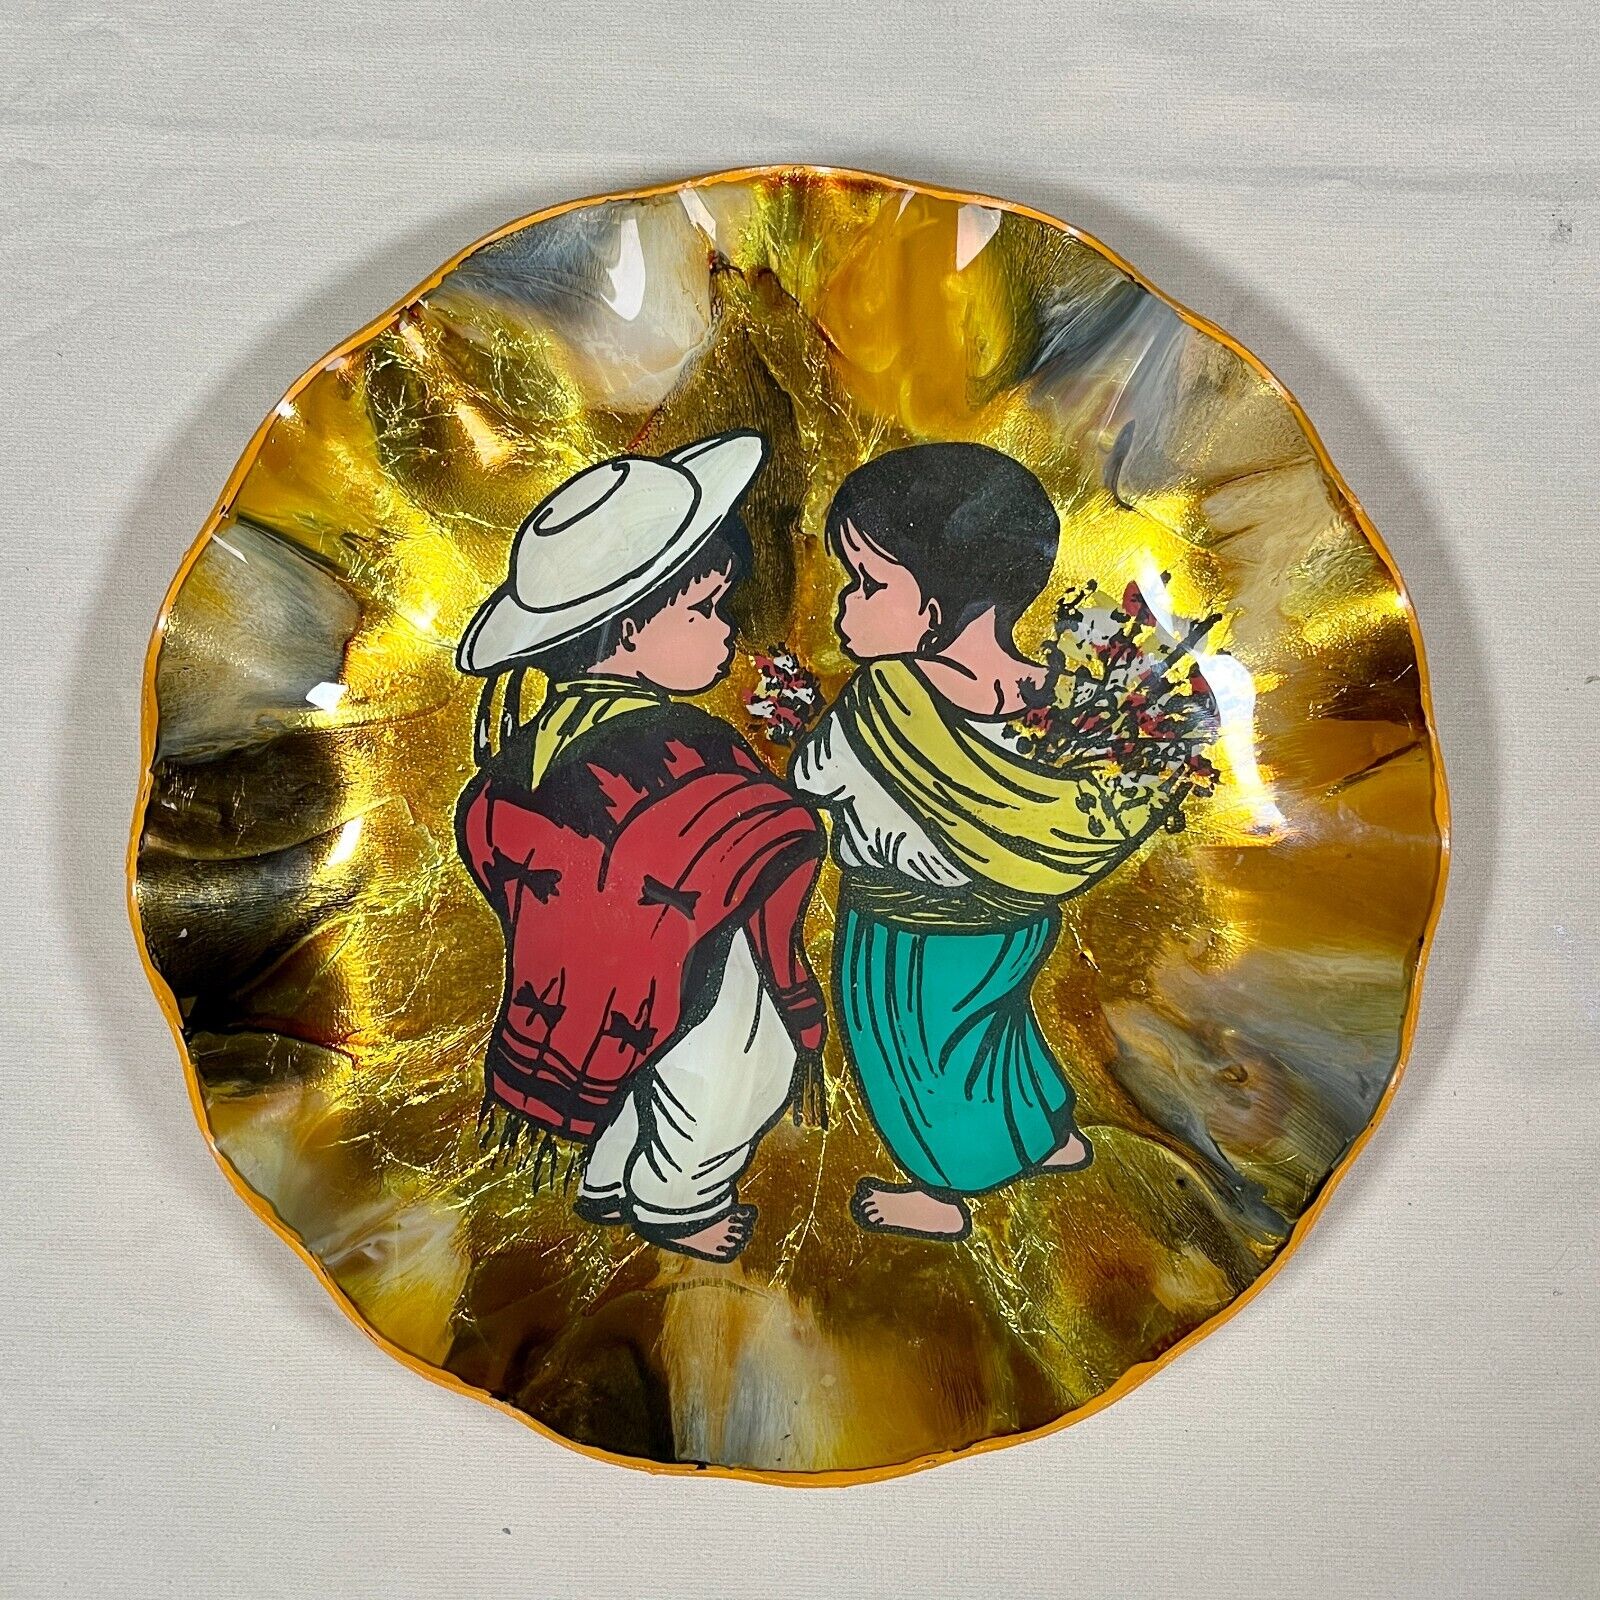 Vintage WOOLWORTH Mexico Decorative Wavy Plate - Reverse Painted Child Art